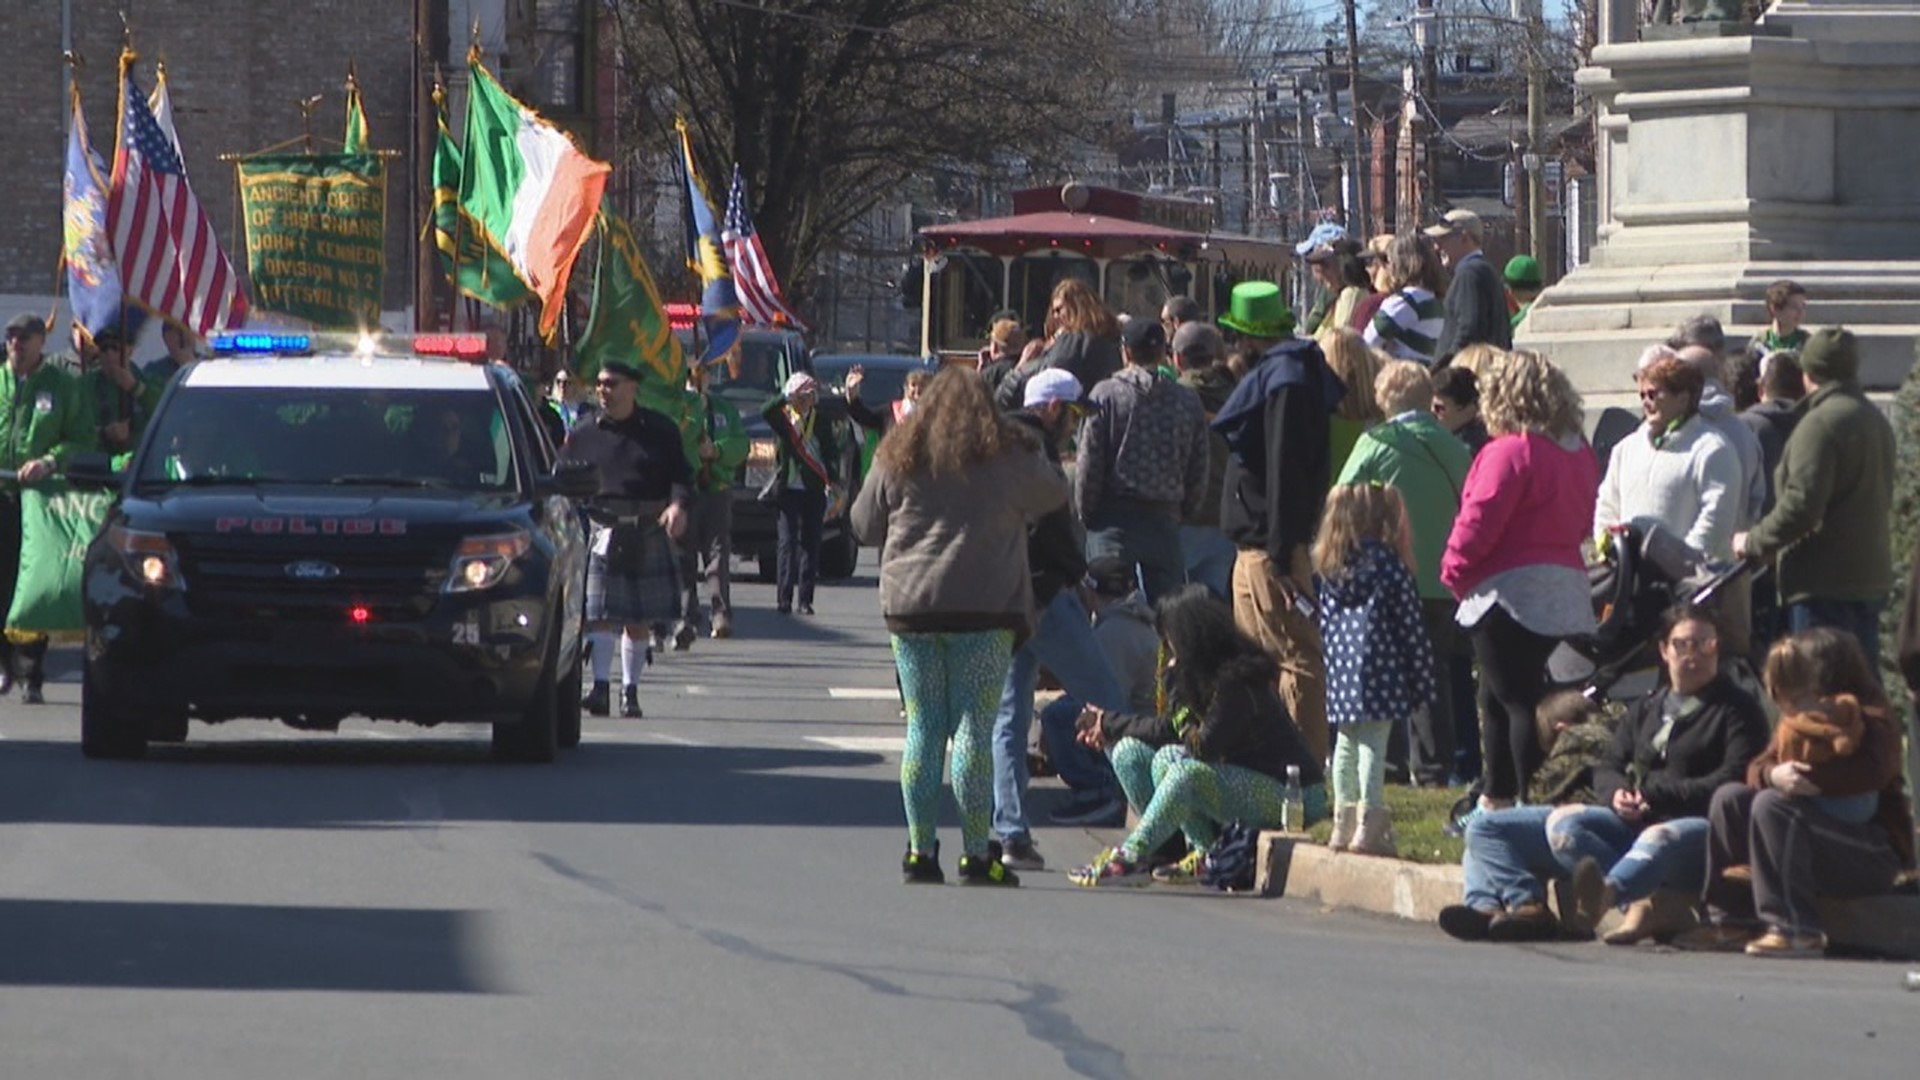 The 48th annual St. Patrick's Day parade stepped off Saturday afternoon